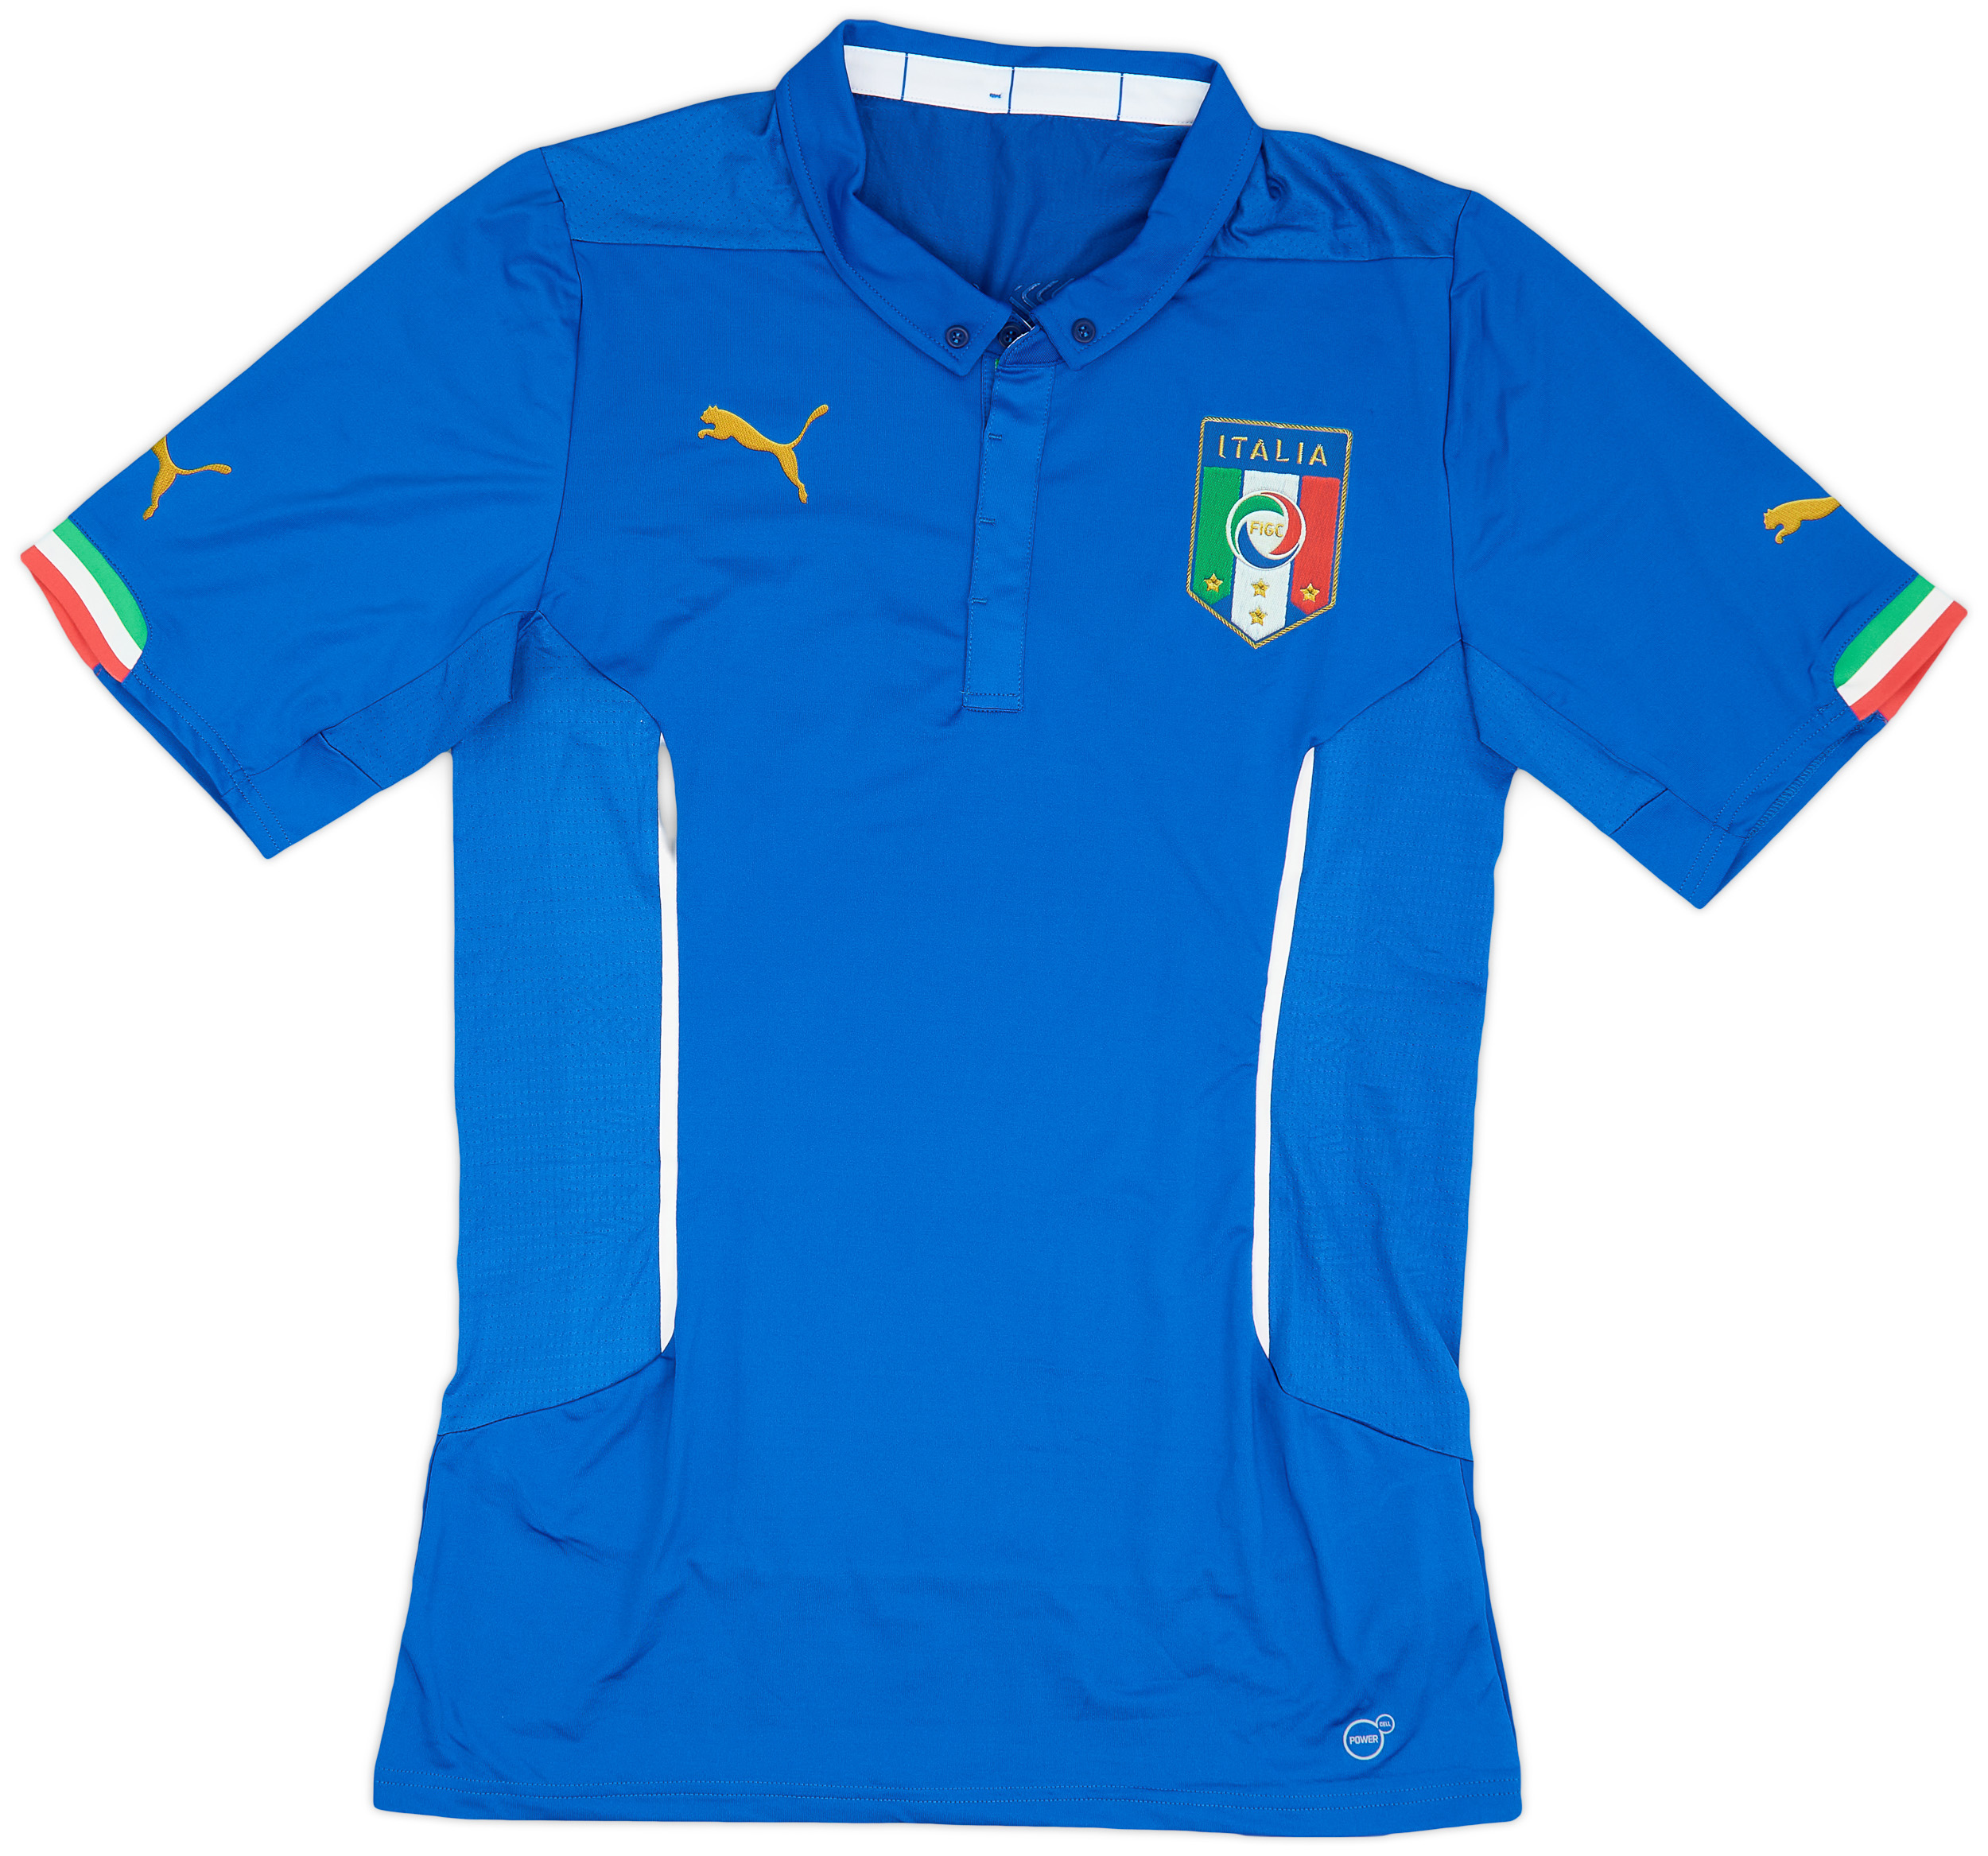 2014-15 Italy Authentic Home Shirt - 9/10 - ()